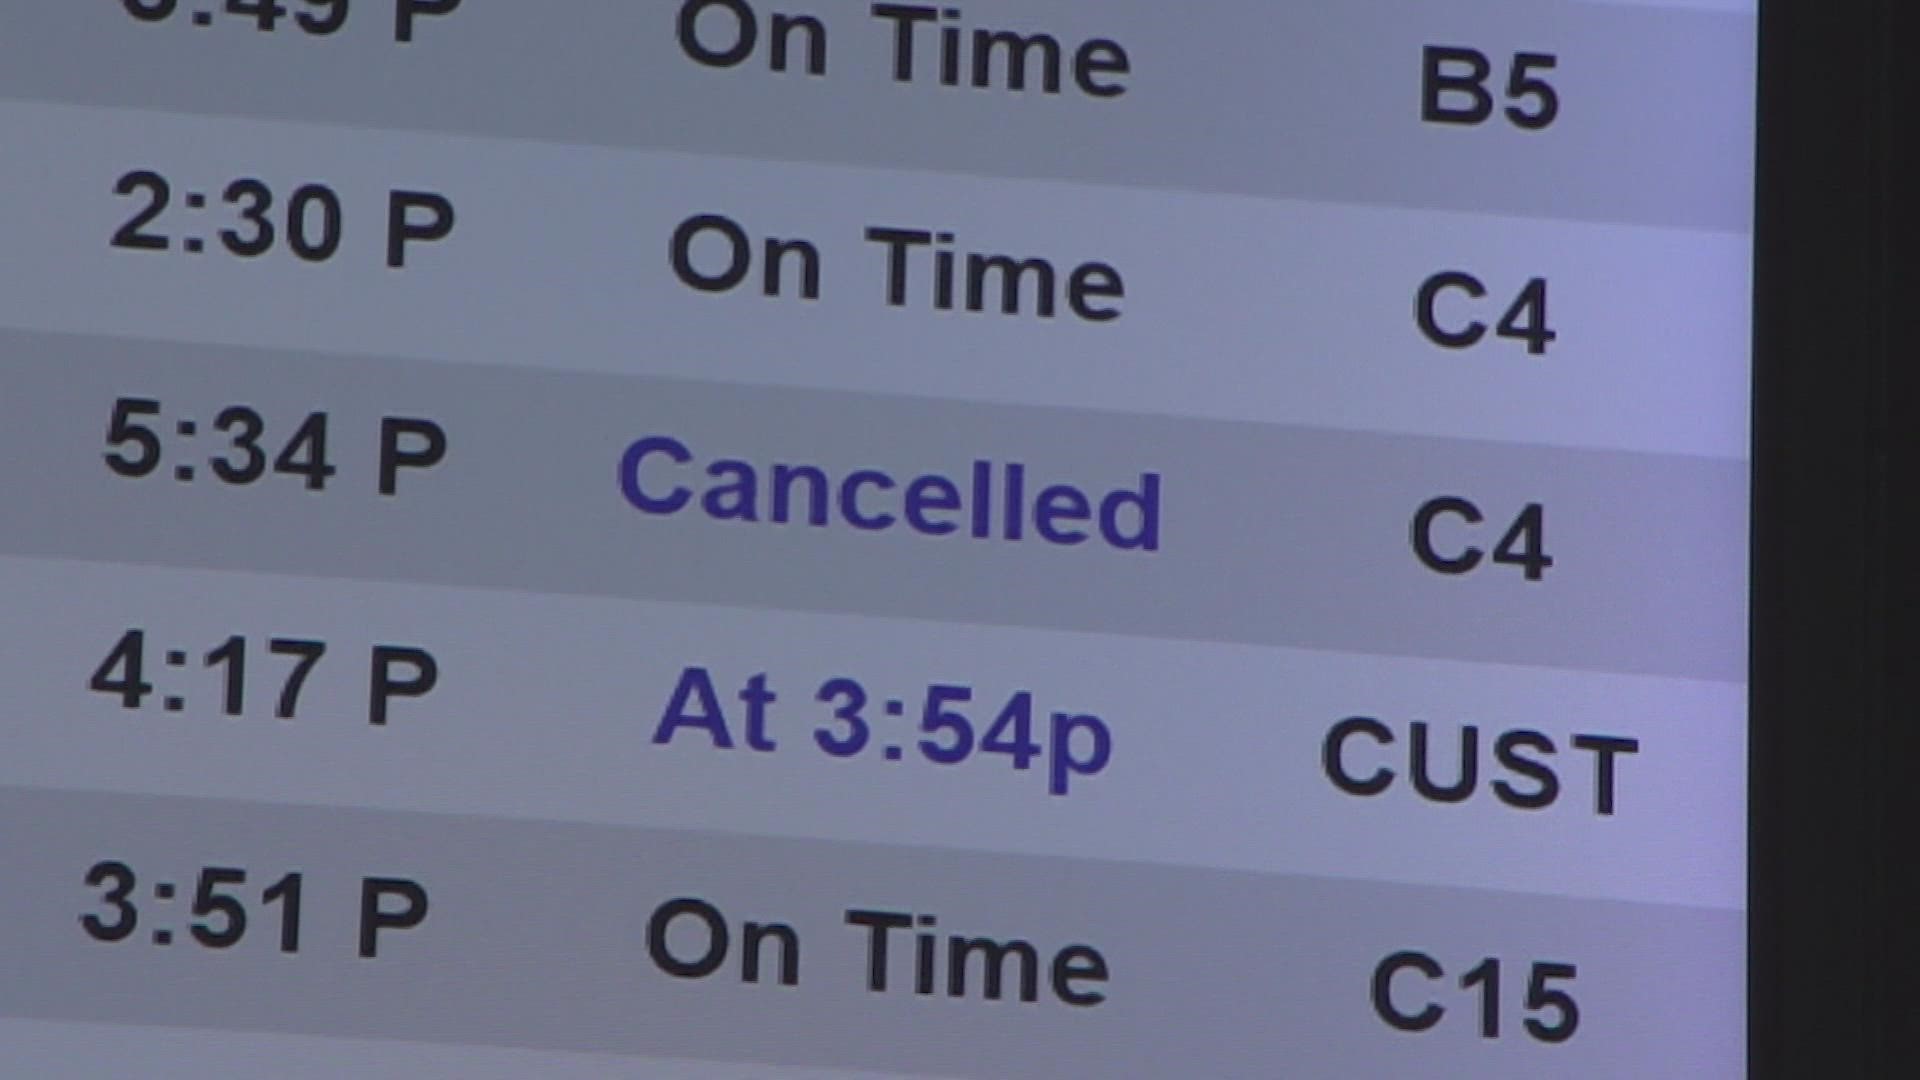 More than 20 flights were canceled Tuesday between DFW and Love Field, according to Flight Aware